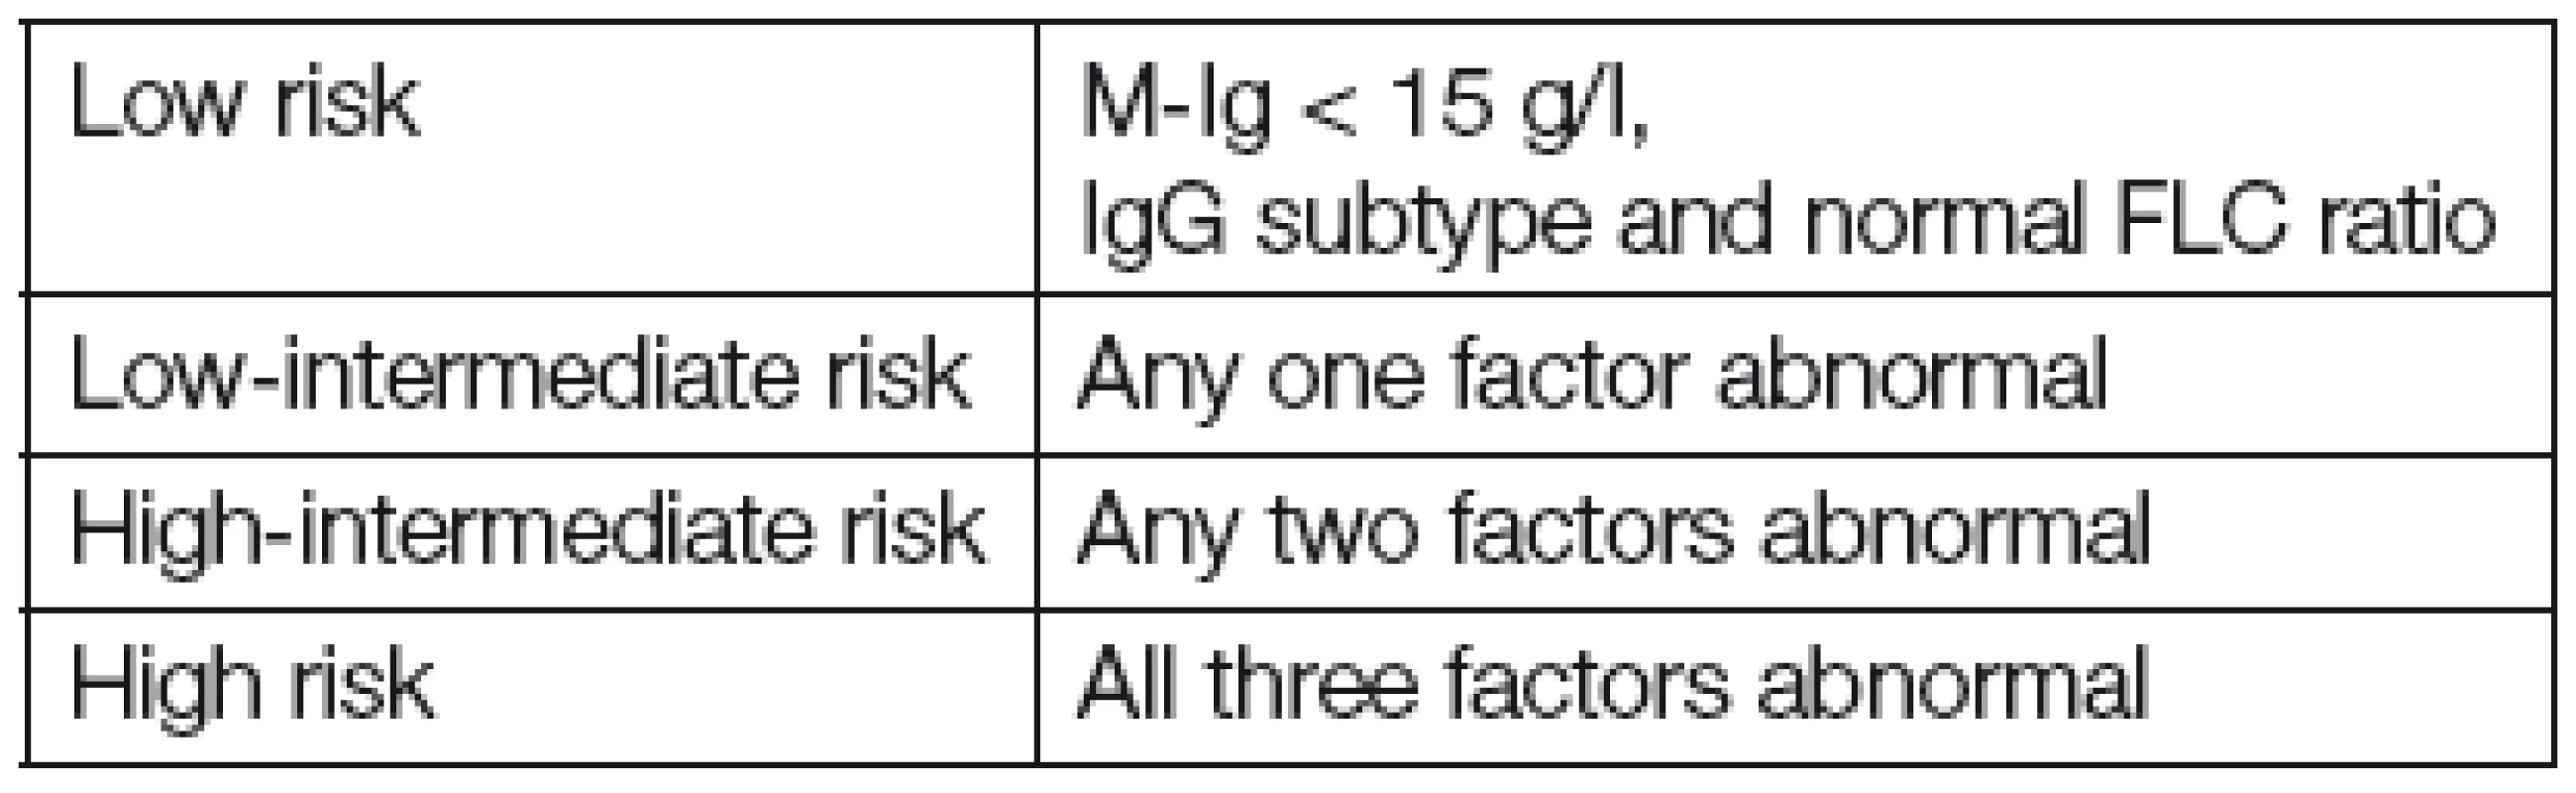 New proposed risk stratification model of MGUS [11]